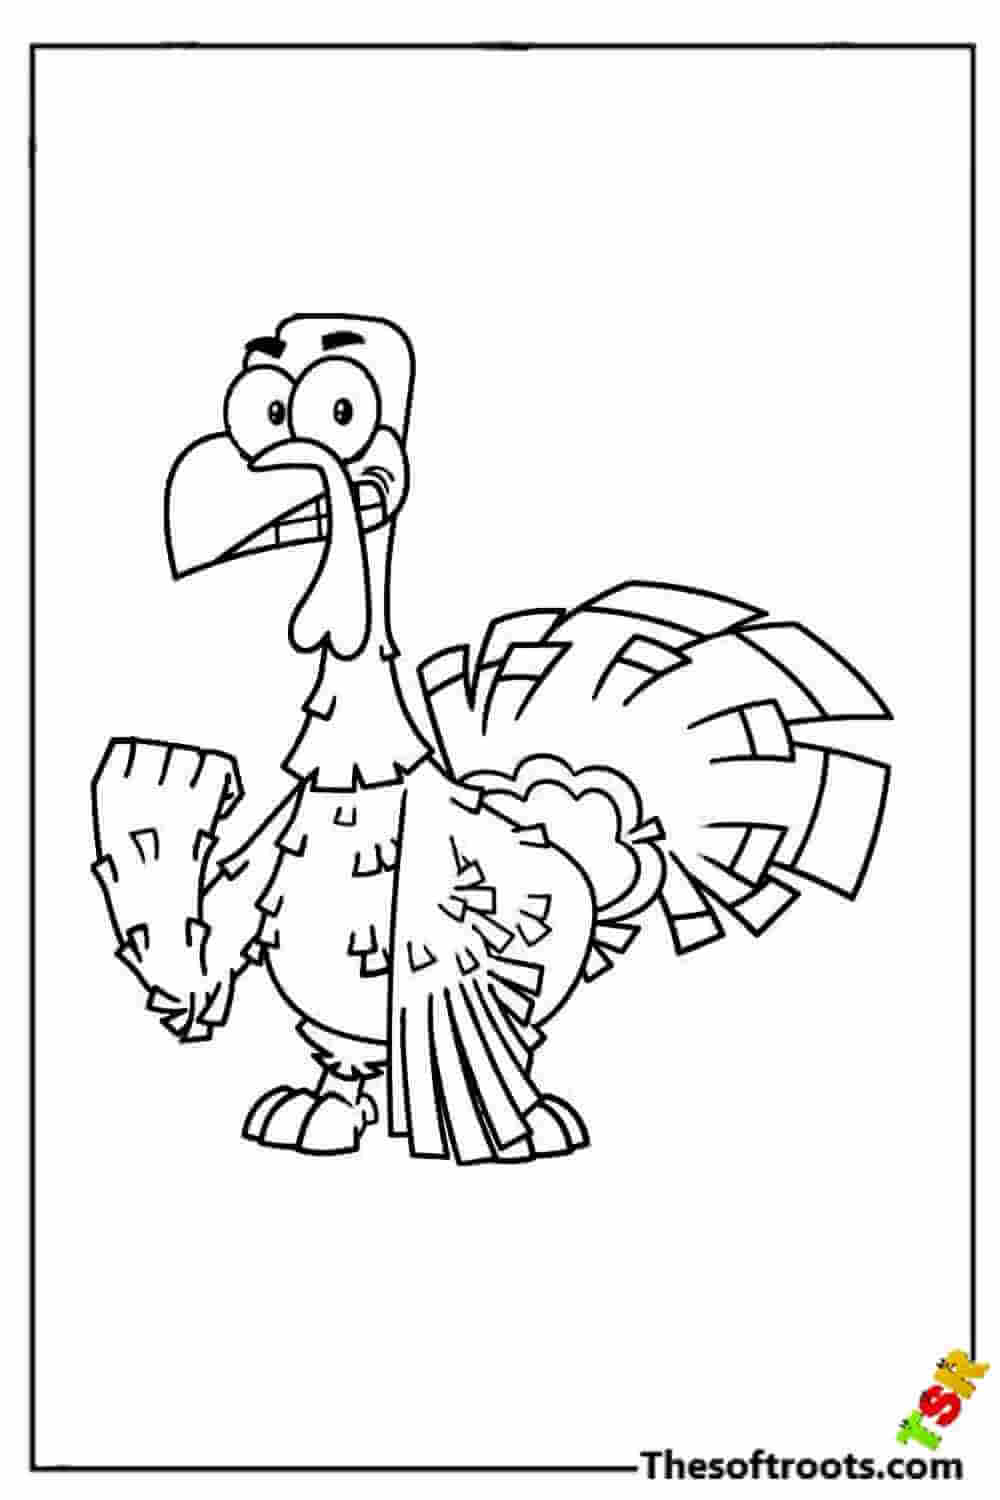 Angry turkey coloring pages